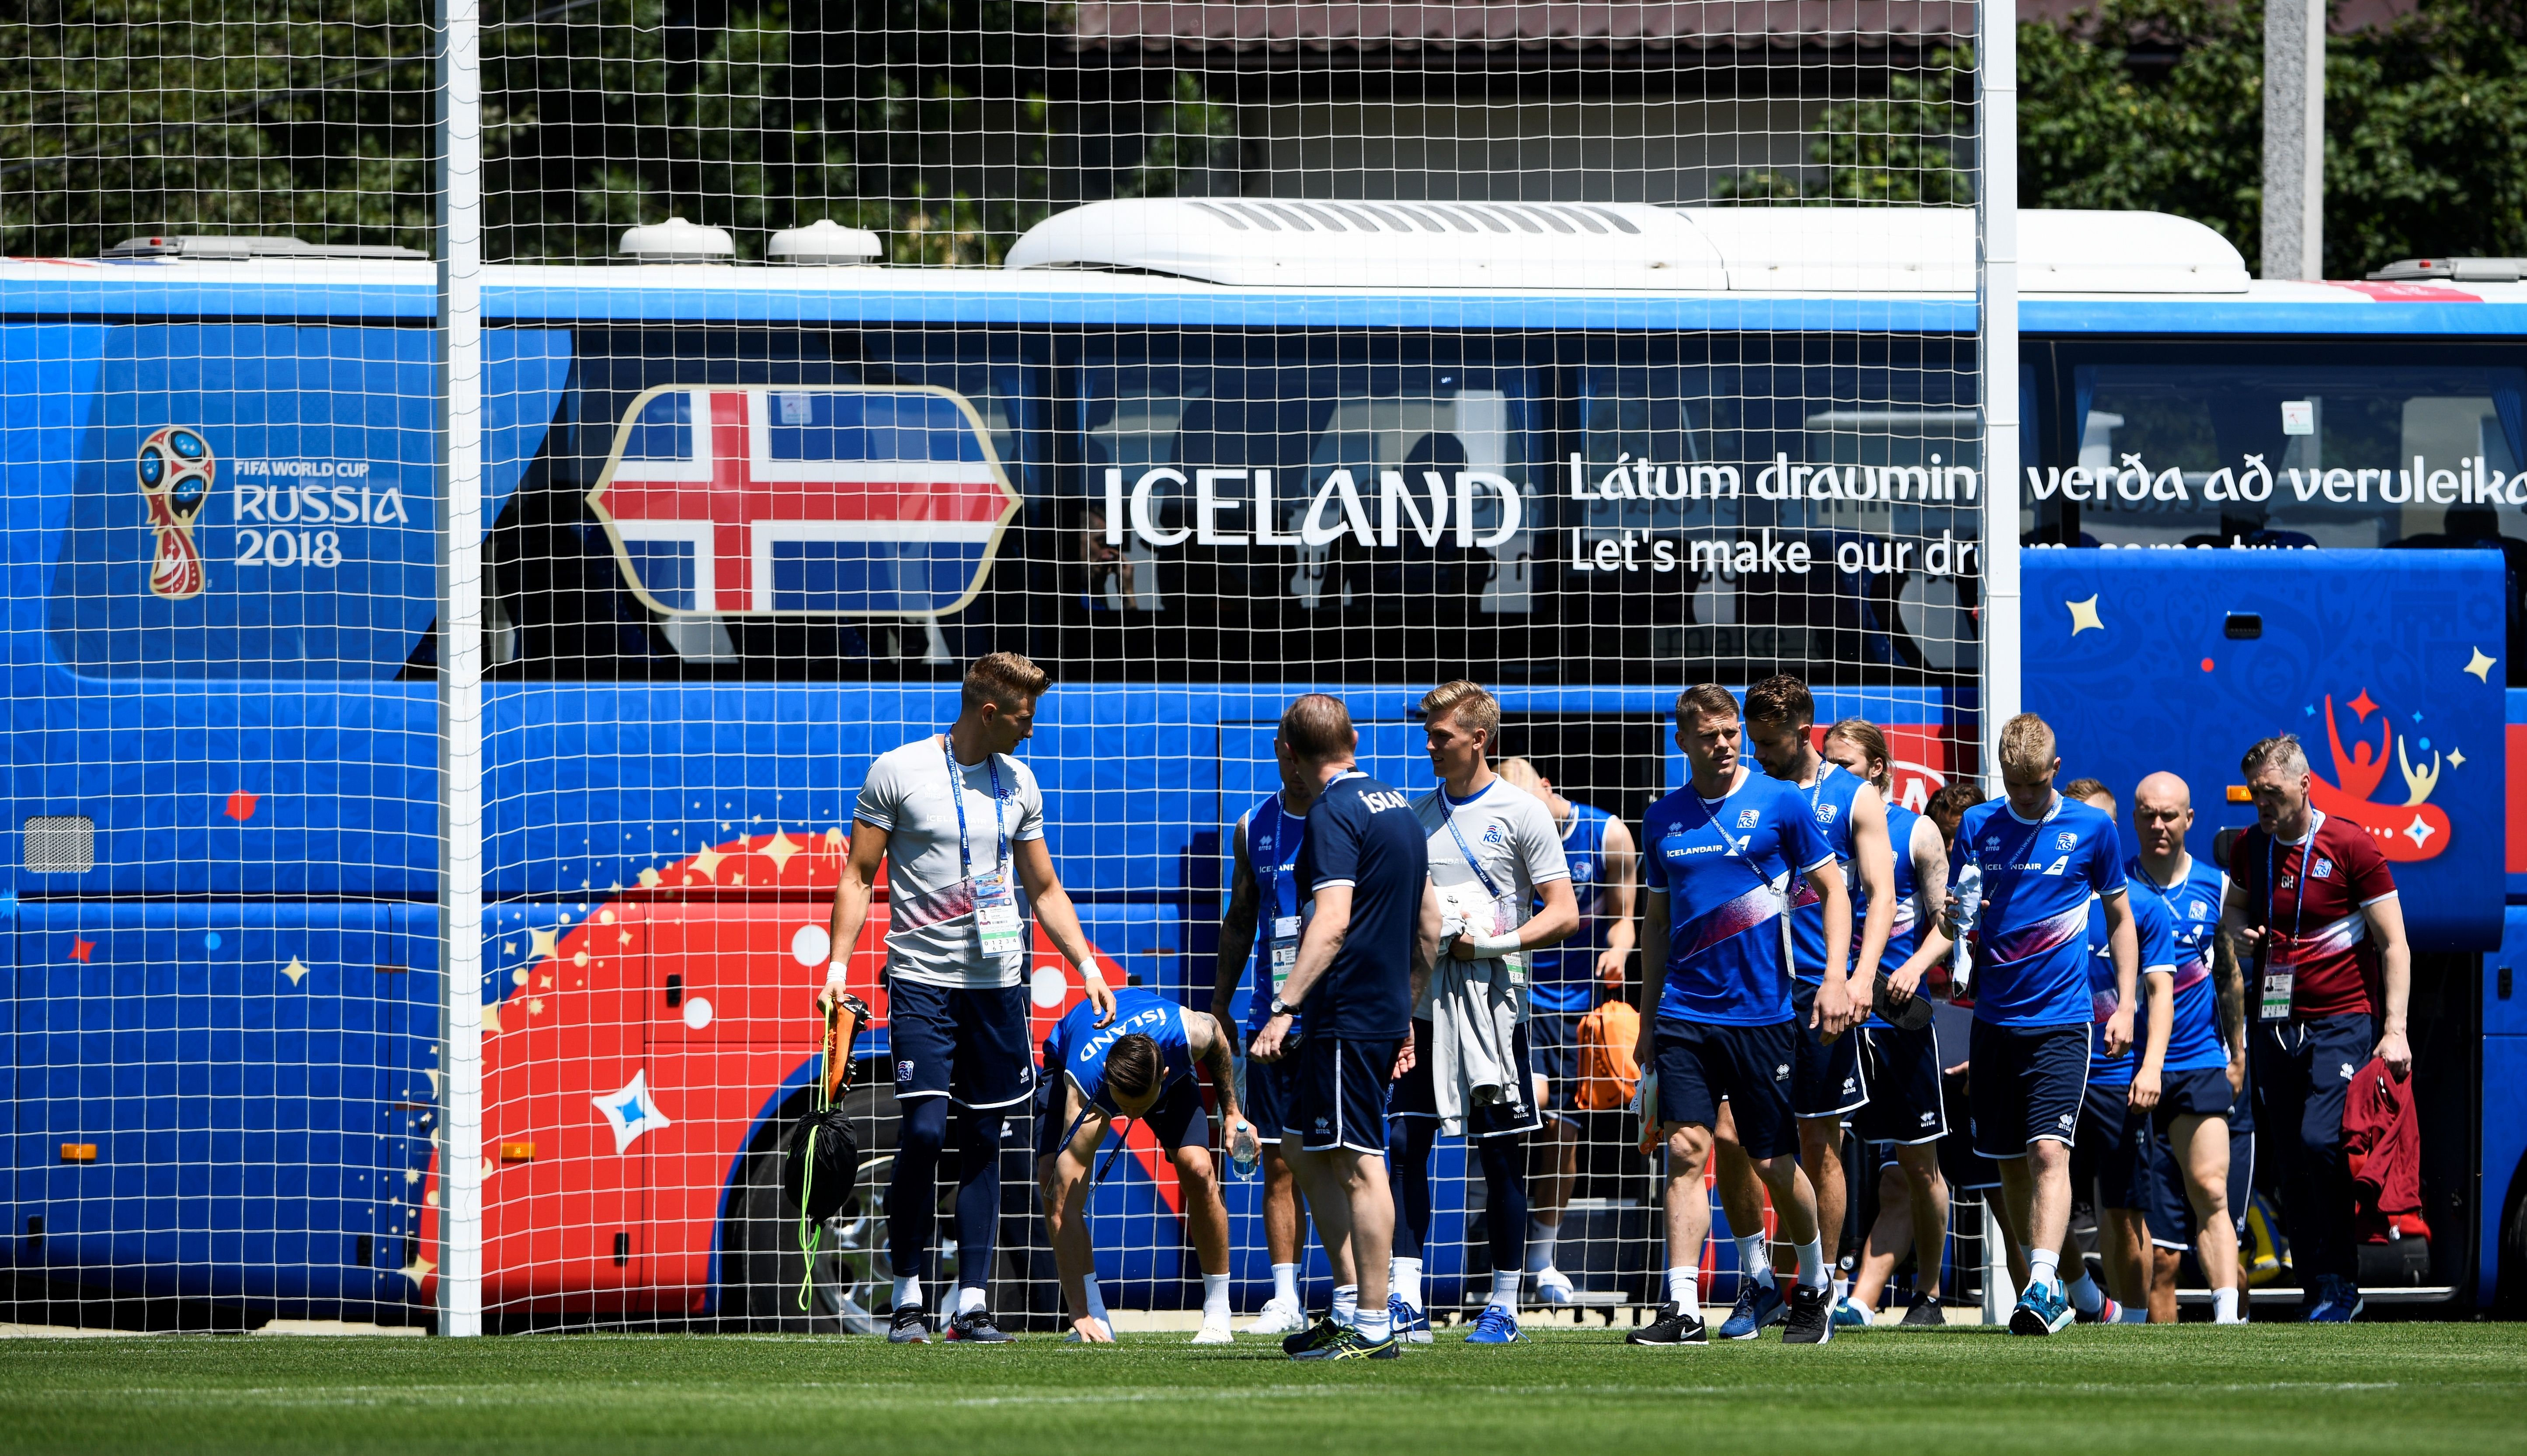 Iceland's players arrive for their first training session at Olimp Stadium in Kabardinka on June 10, 2018, ahead of the Russia 2018 World Cup. (Photo by Jonathan NACKSTRAND / AFP)        (Photo credit should read JONATHAN NACKSTRAND/AFP/Getty Images)